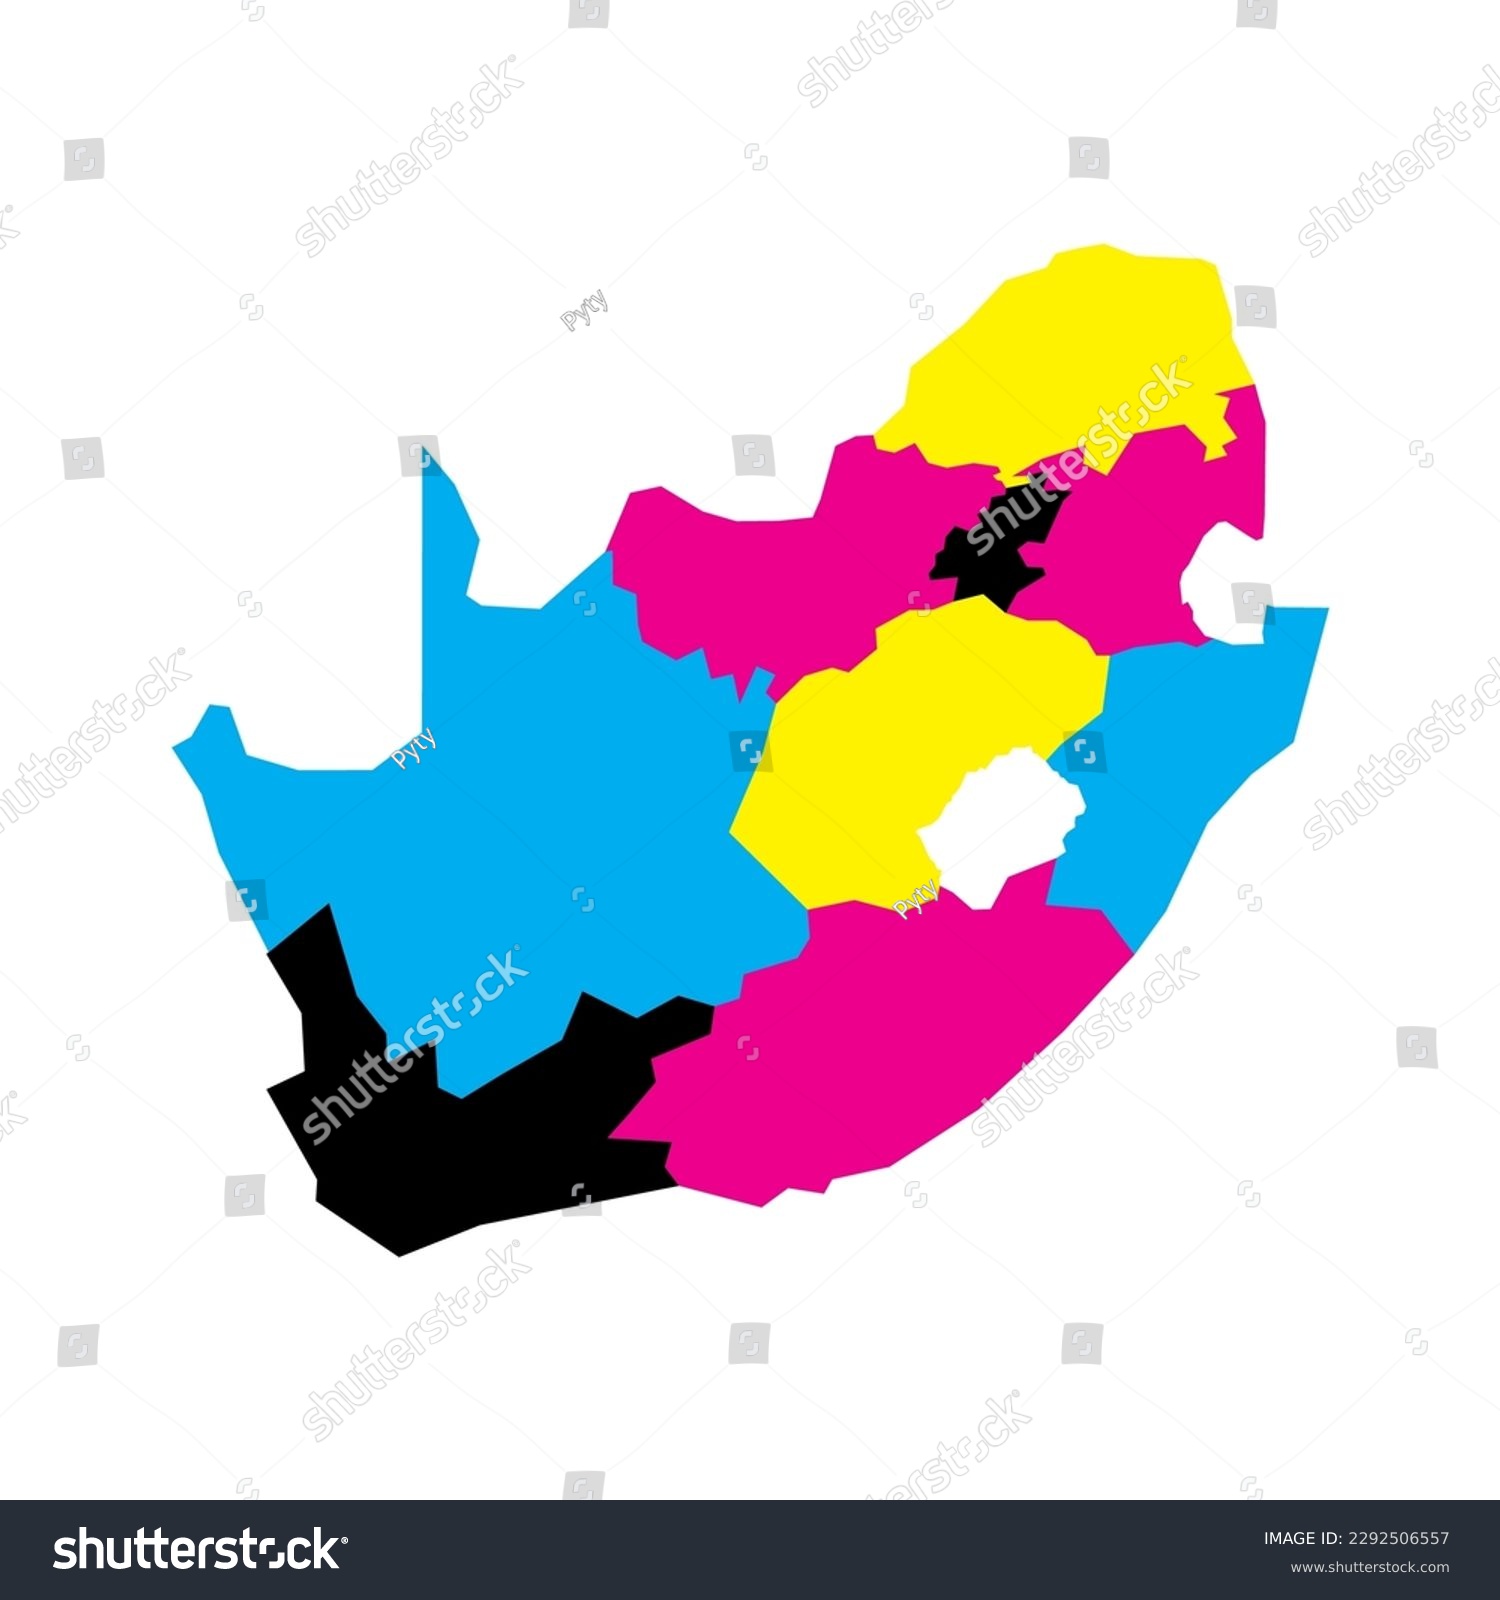 South Africa Political Map Of Administrative Royalty Free Stock Vector 2292506557 1439